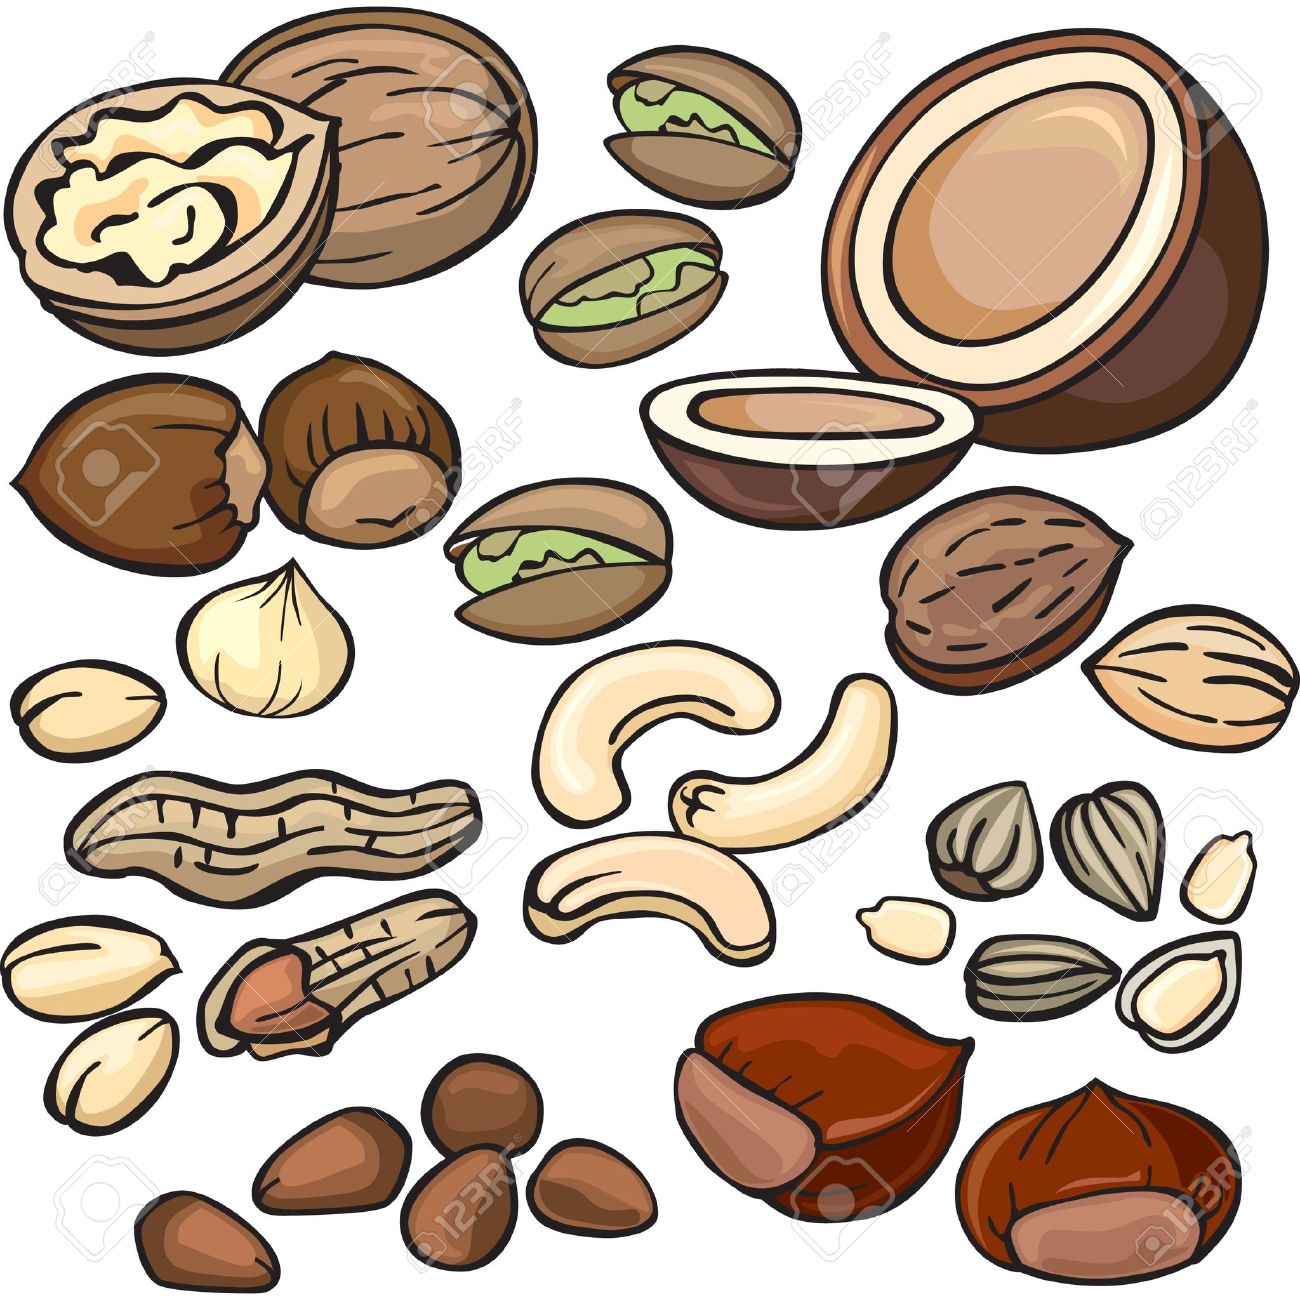 Nuts - ClipArt Images